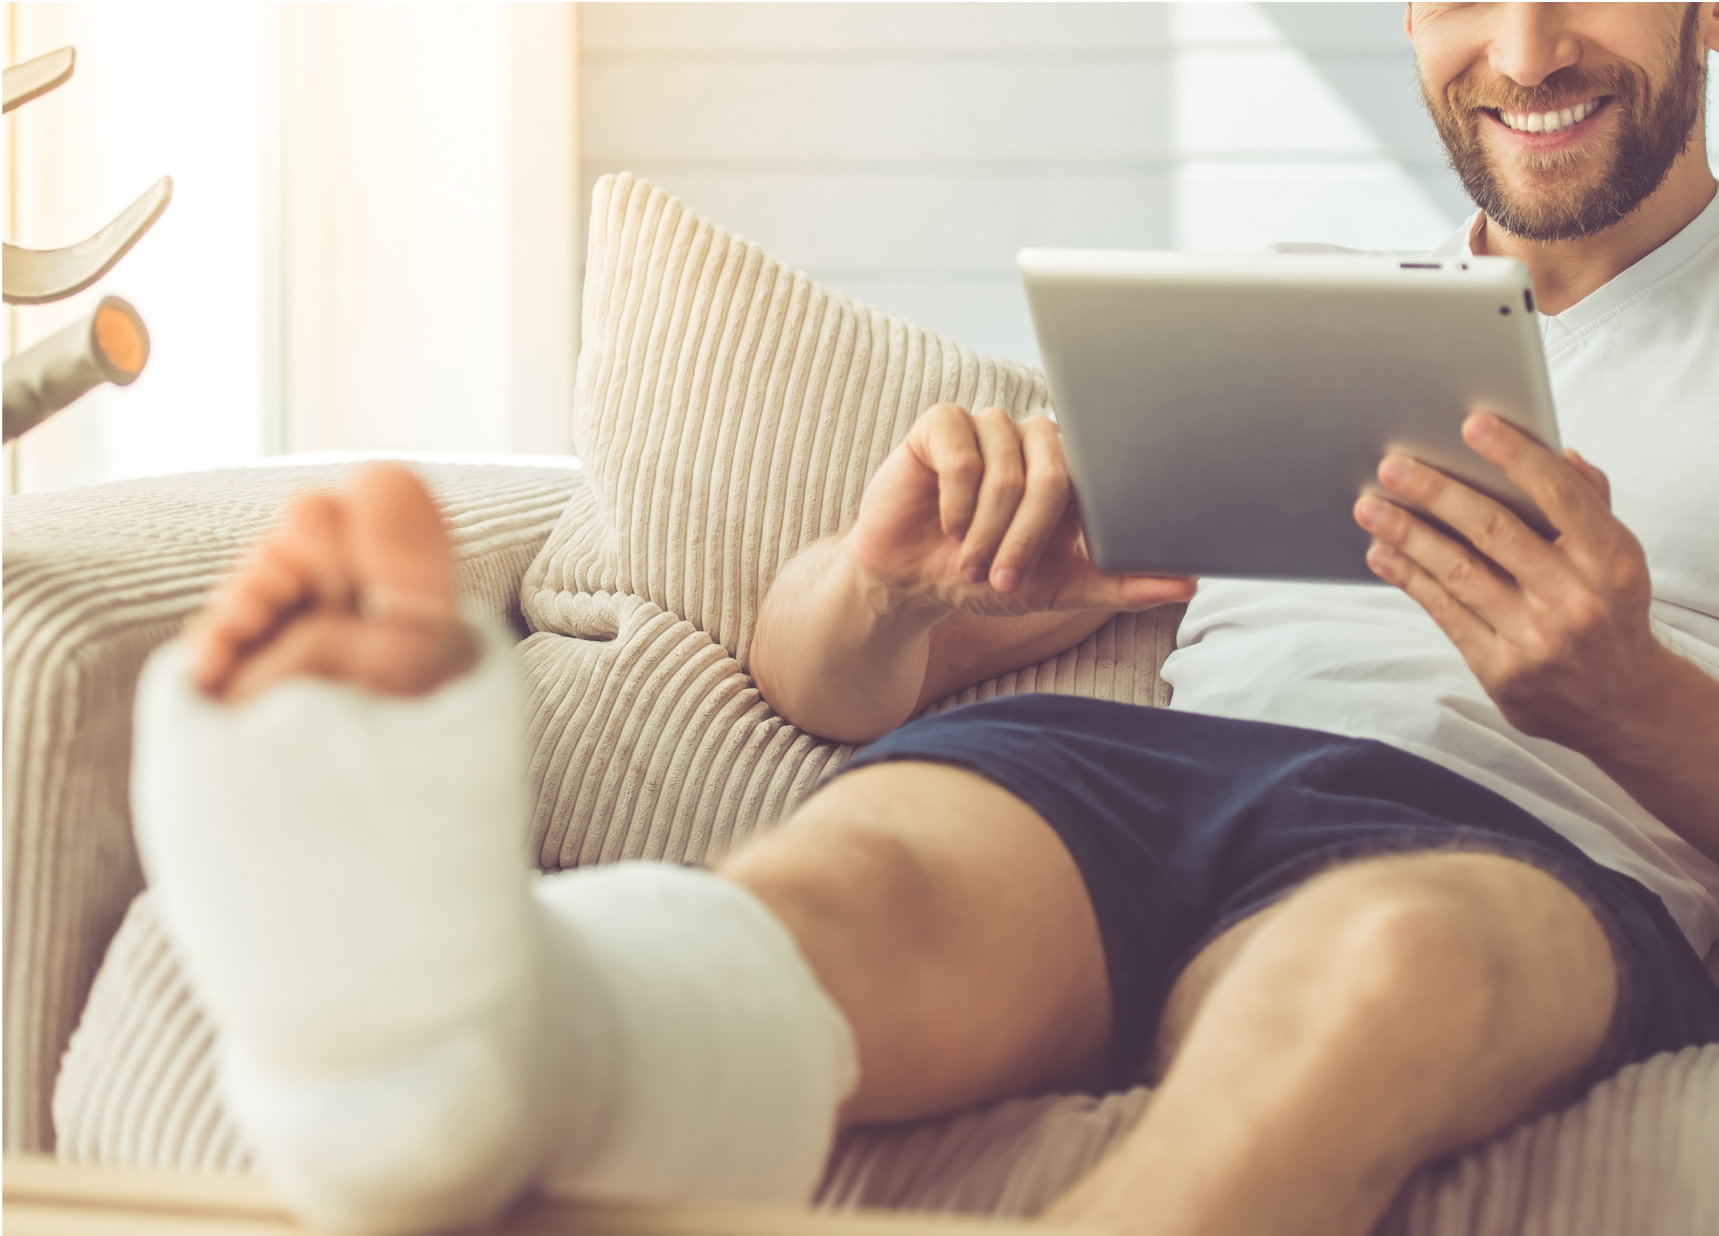 A man has a cast on his leg. Your homeowners quote includes coverage to pay medical expenses if someone is hurt on your property.